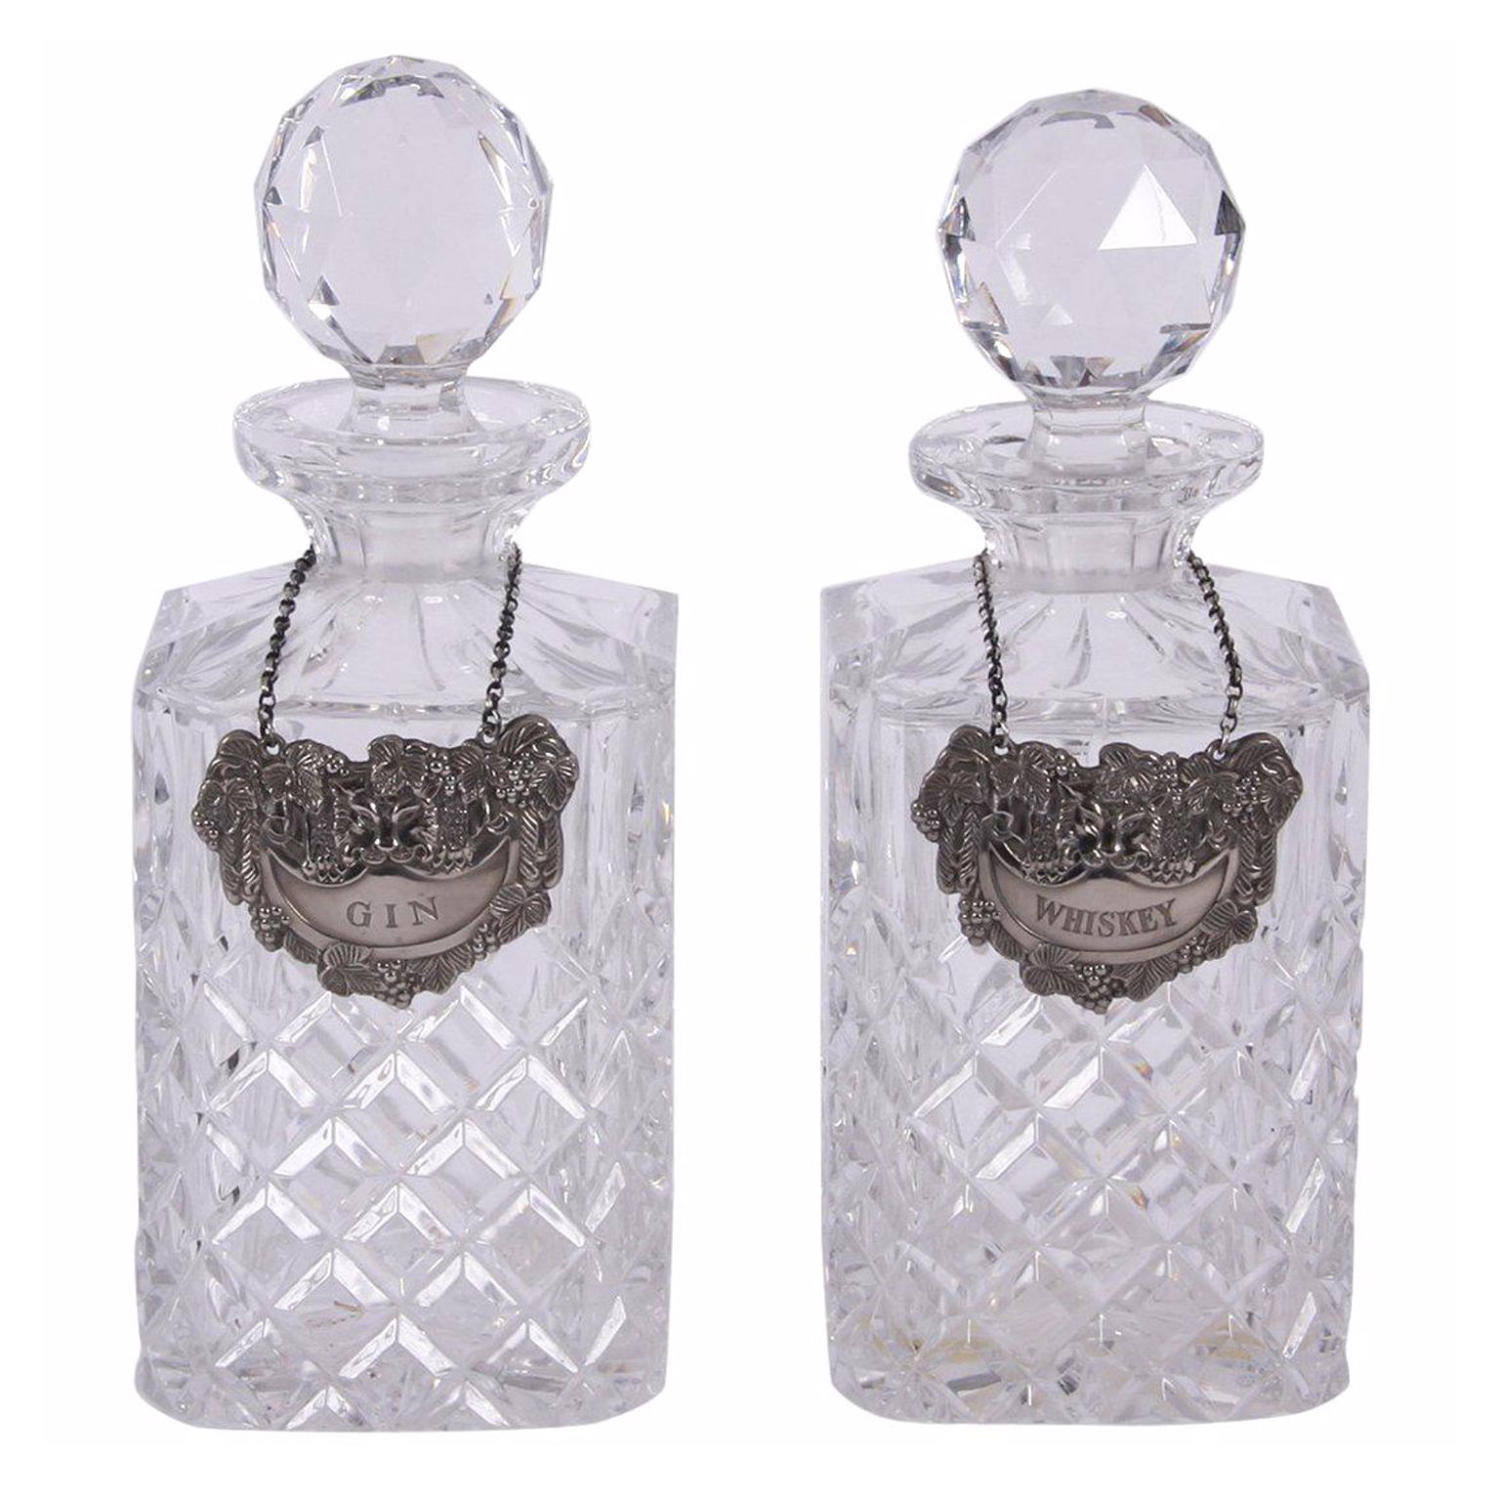 Pair of Decanters With Spirit Labels